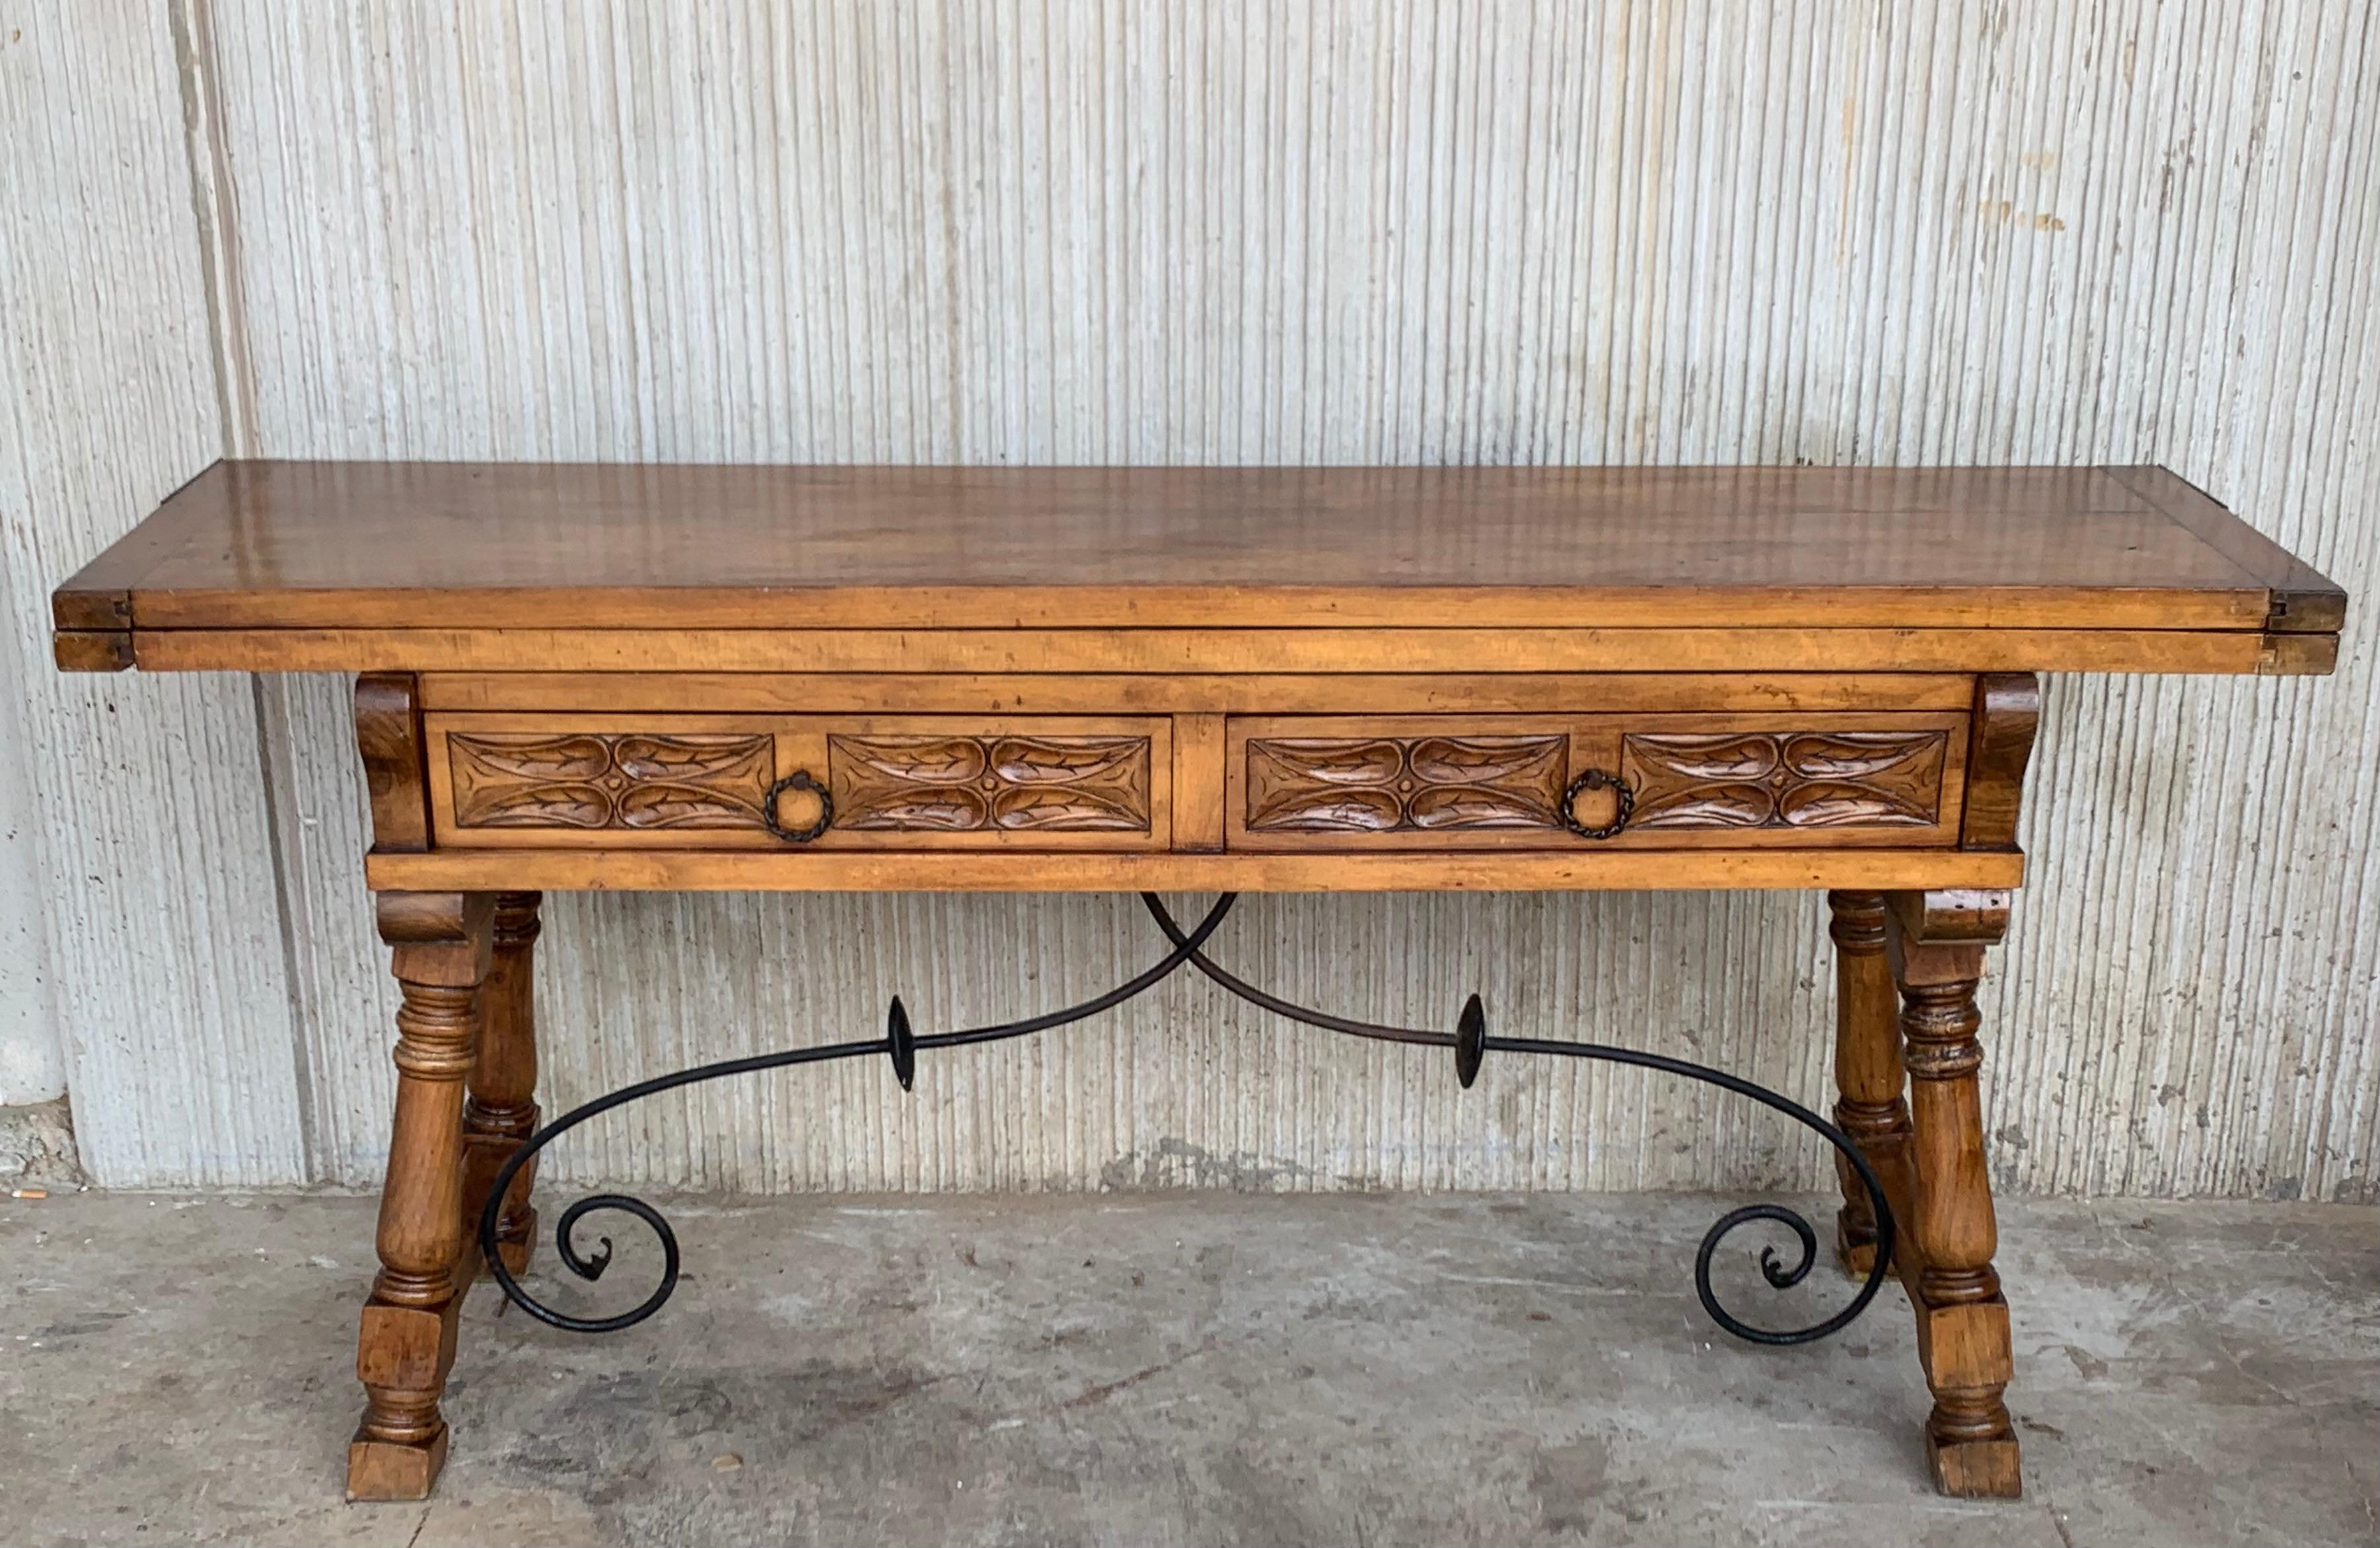 20th century Spanish console fold out farm table
Works as both a dining table and console.
The table is carved in front and back with the same carved.
  